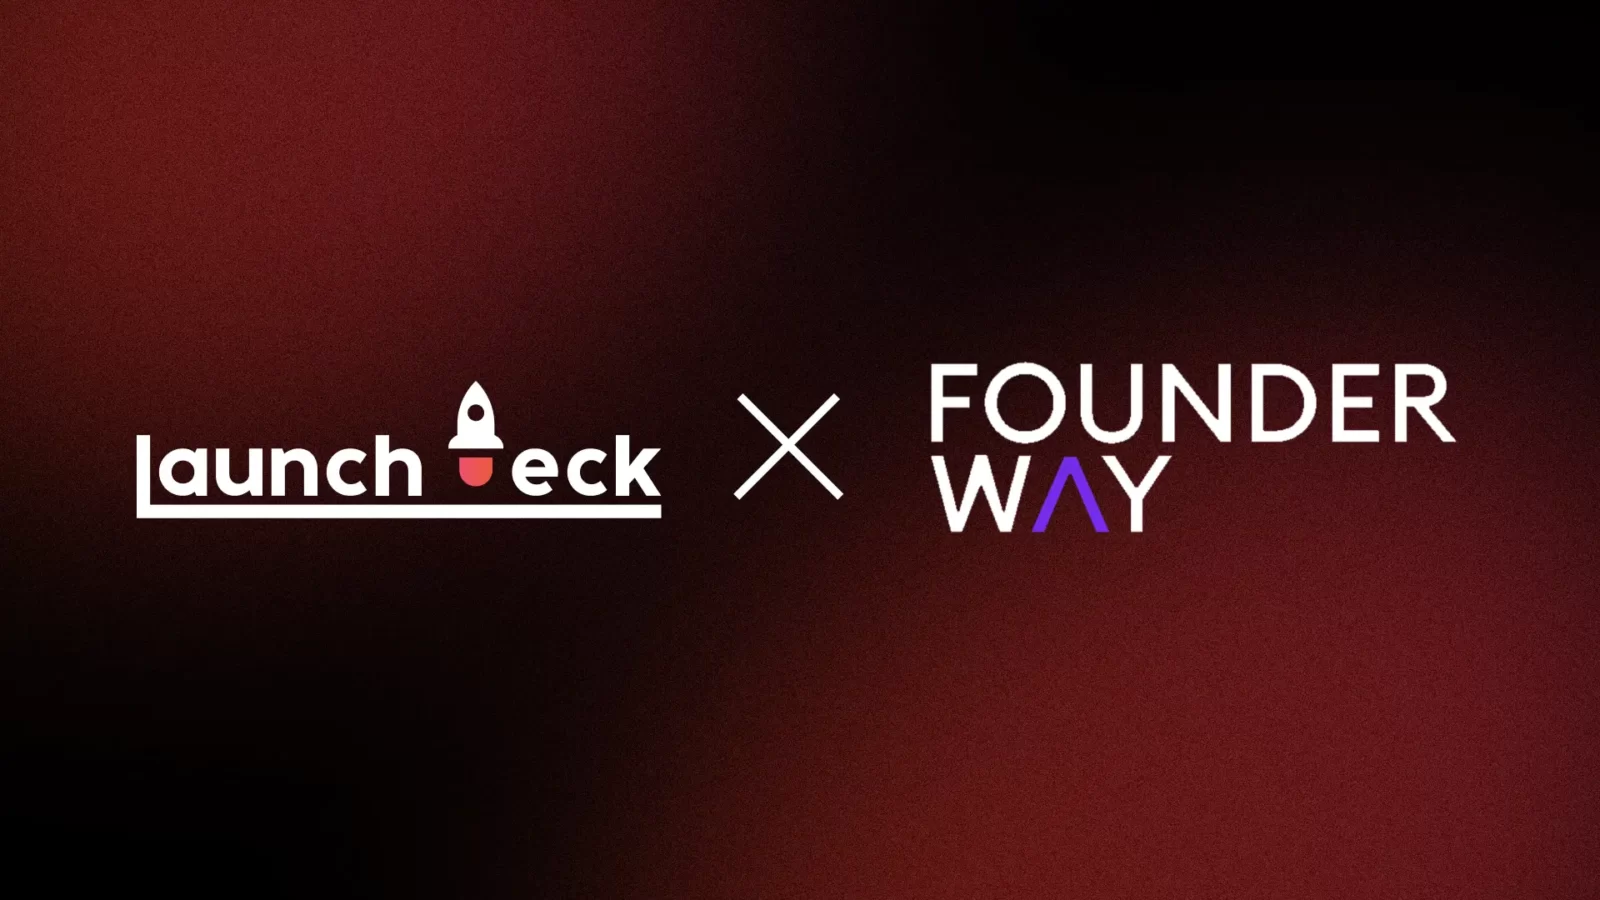 Launchdeck and FounderWay